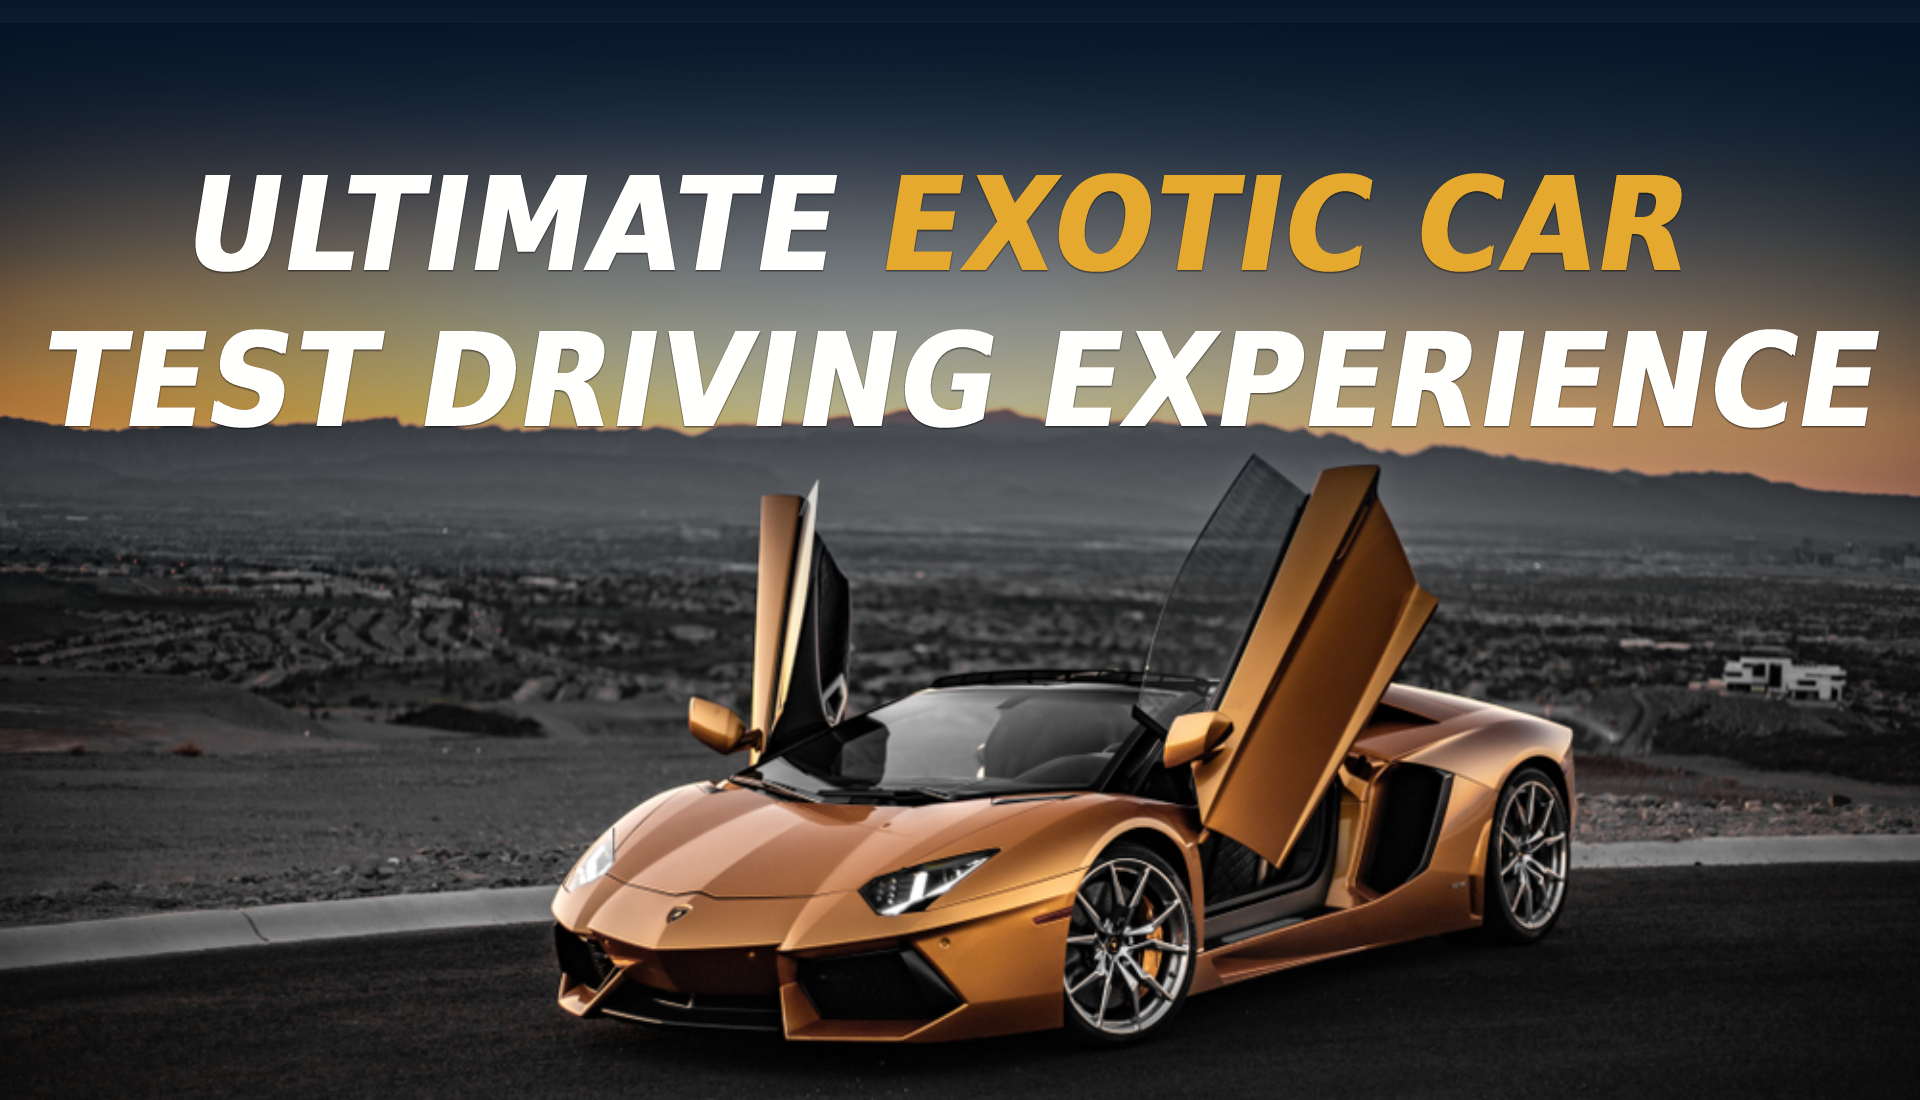 Drive in Style: Try the Ultimate Exotic Car Test Driving Experience exotic rental cars yacht charters Miami